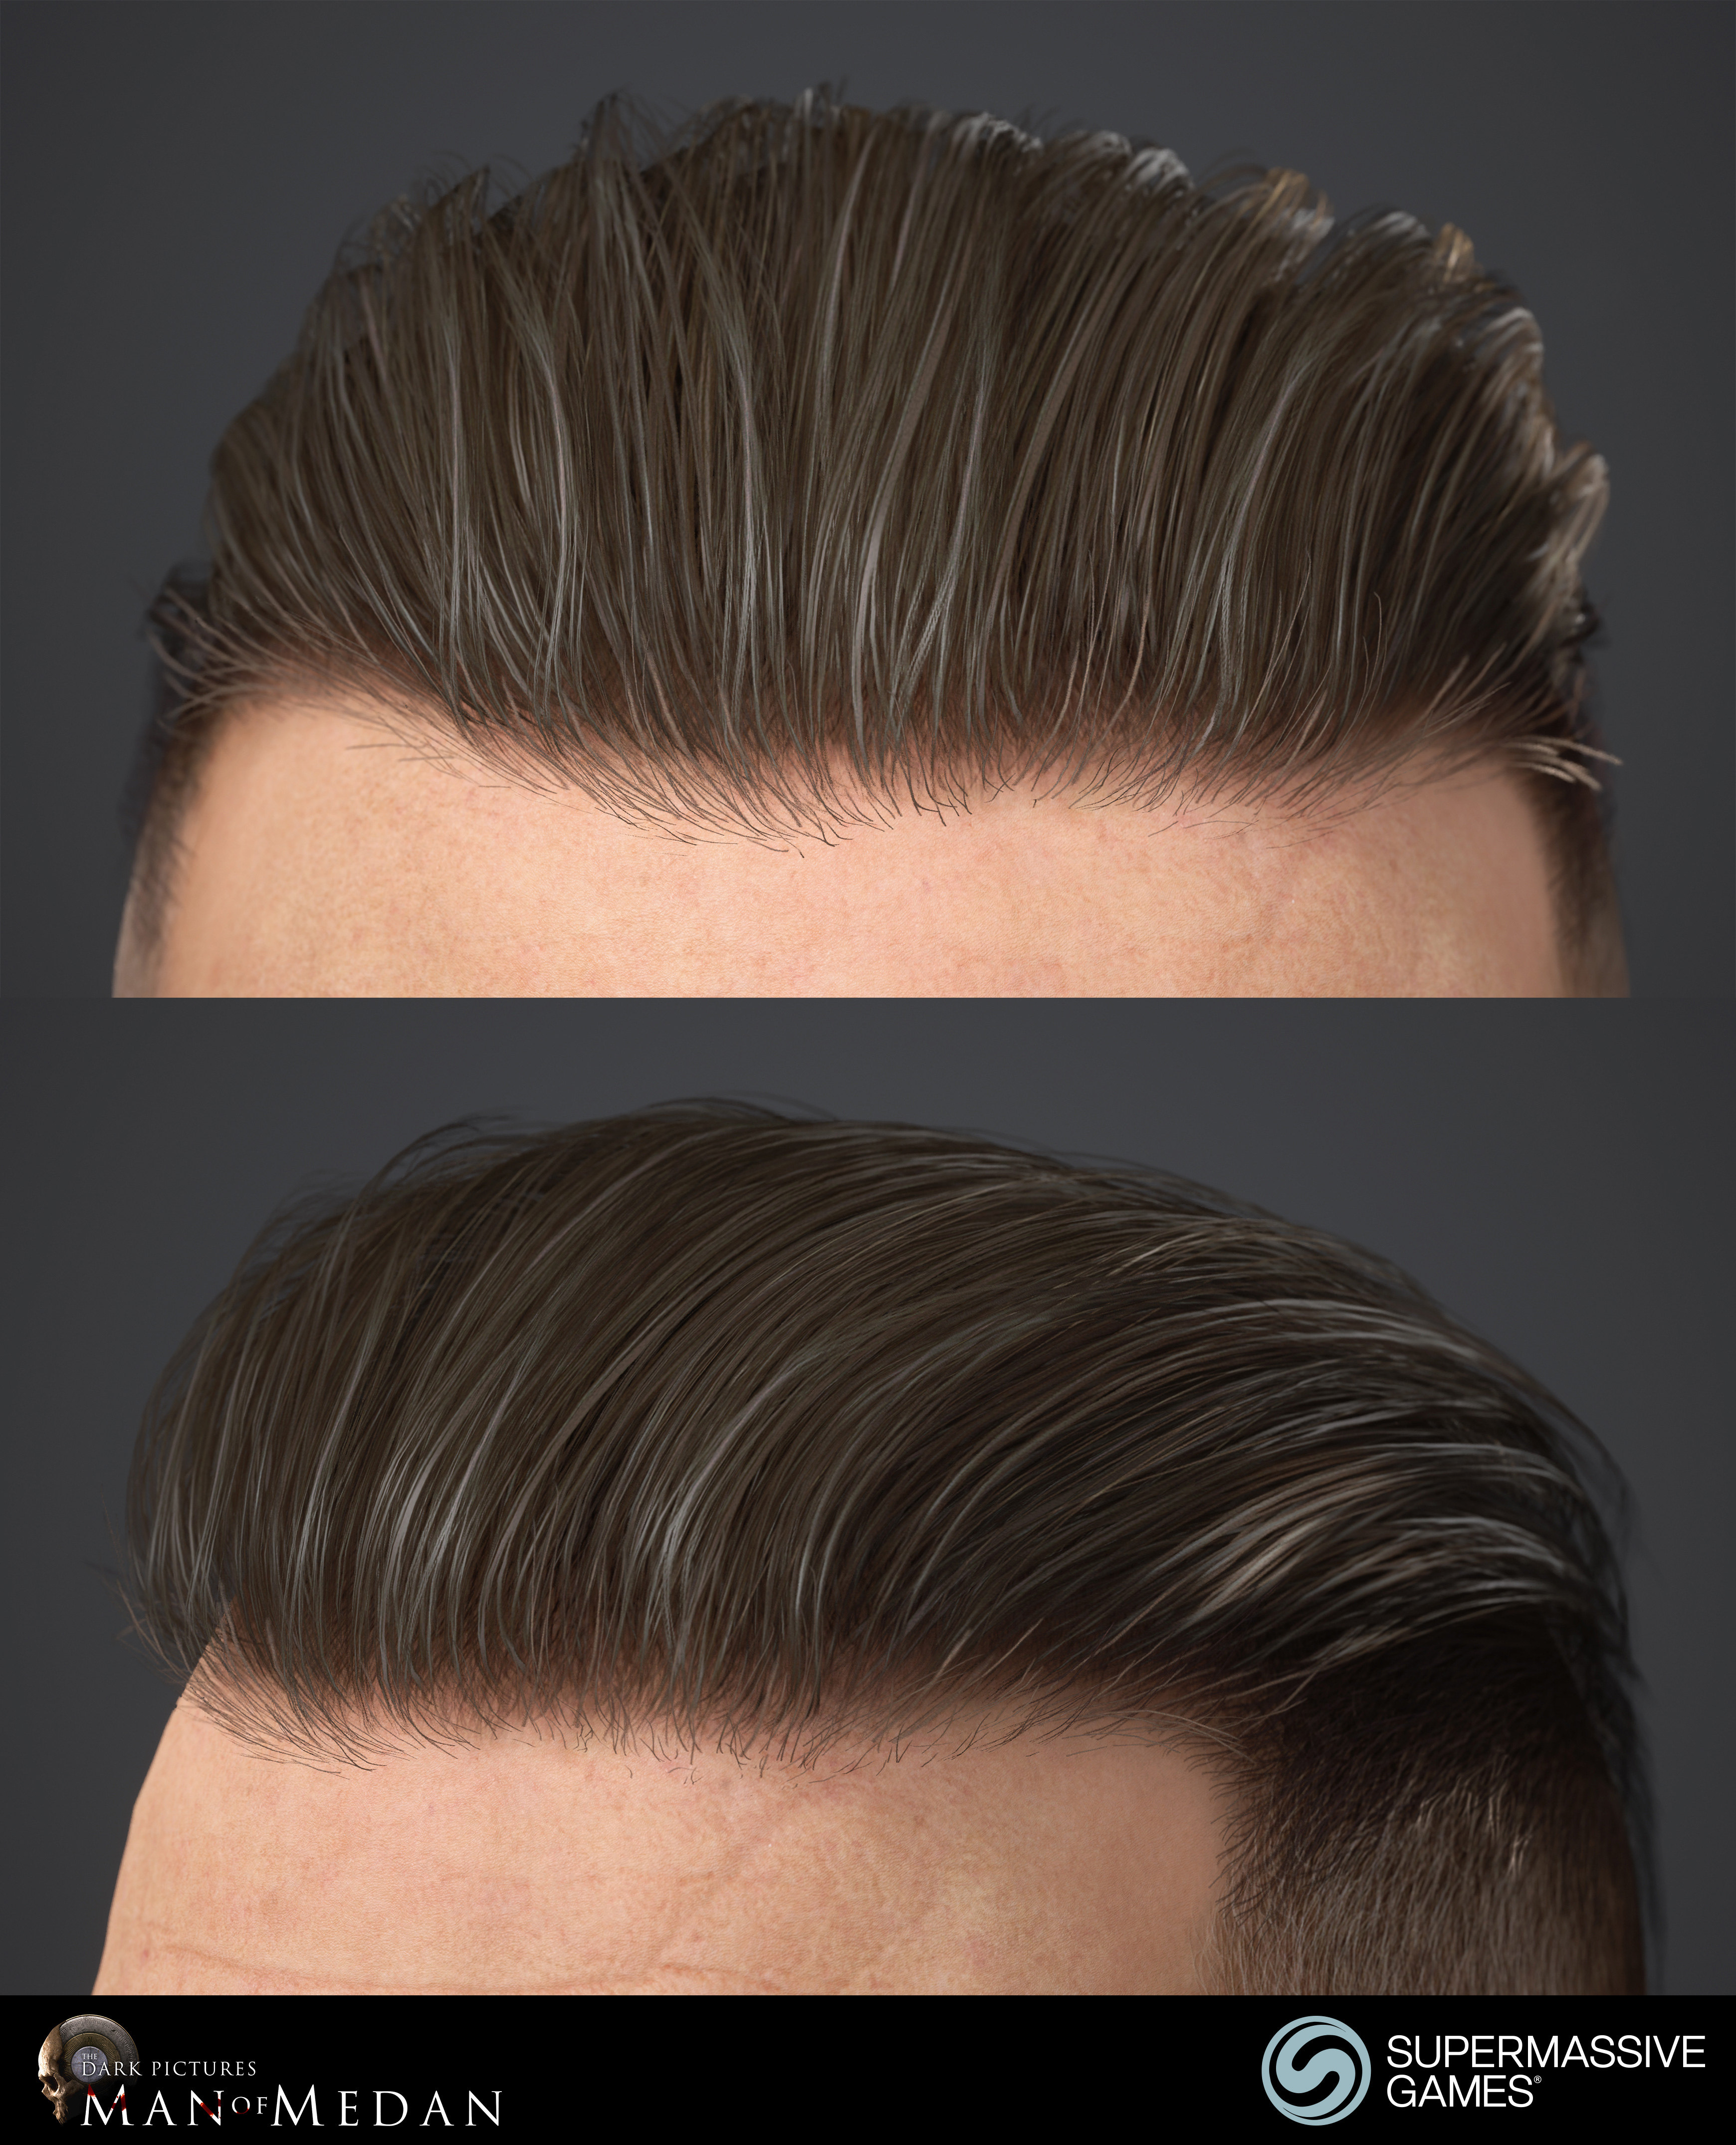 The Curator character from The Dark Pictures game in Unreal Engine. Strong hold hair wax, game hair. Andor Kollar